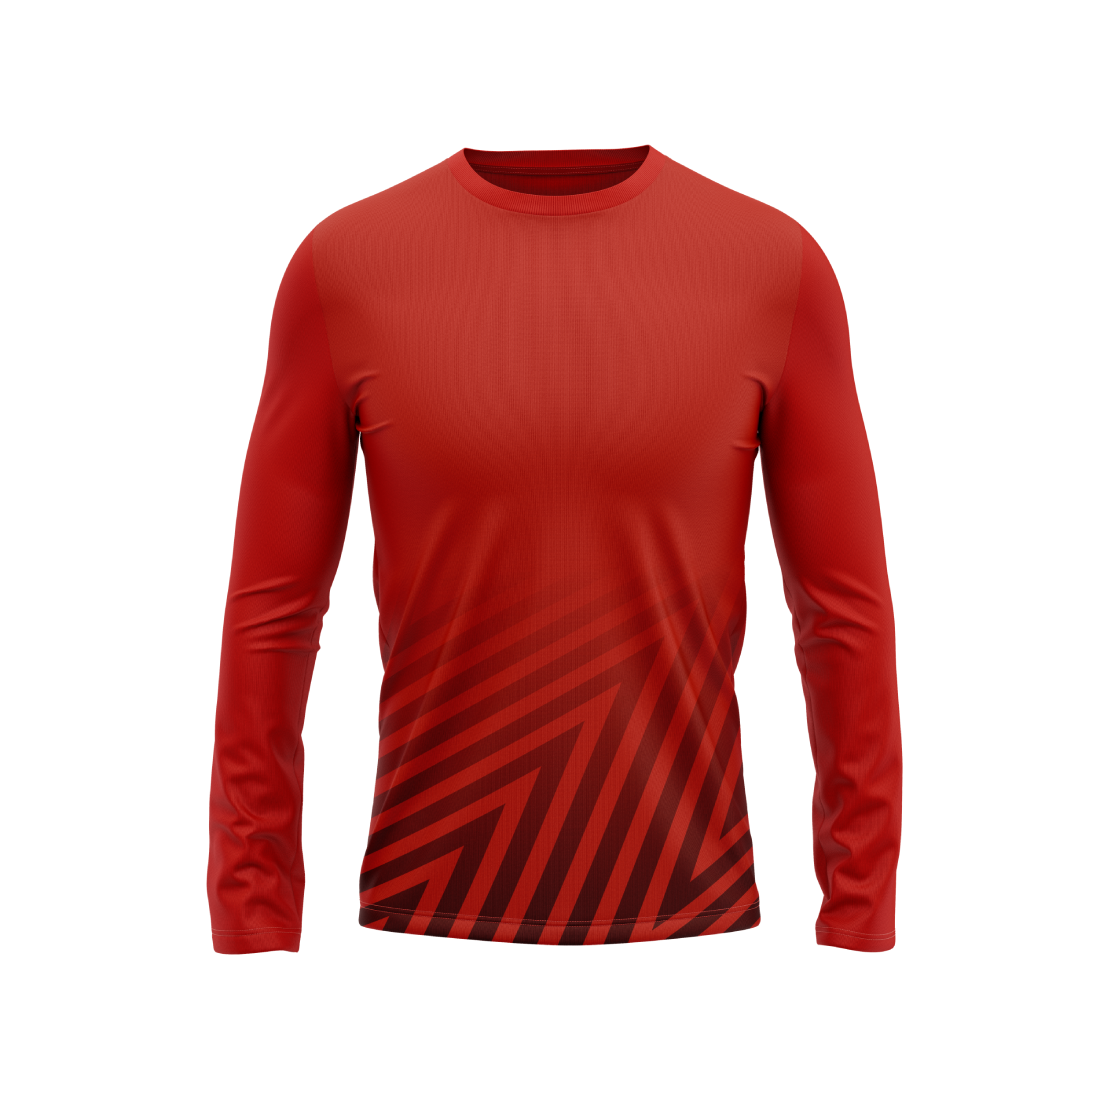 Round Neck Fullsleeve Printed Jersey Red NP5000082